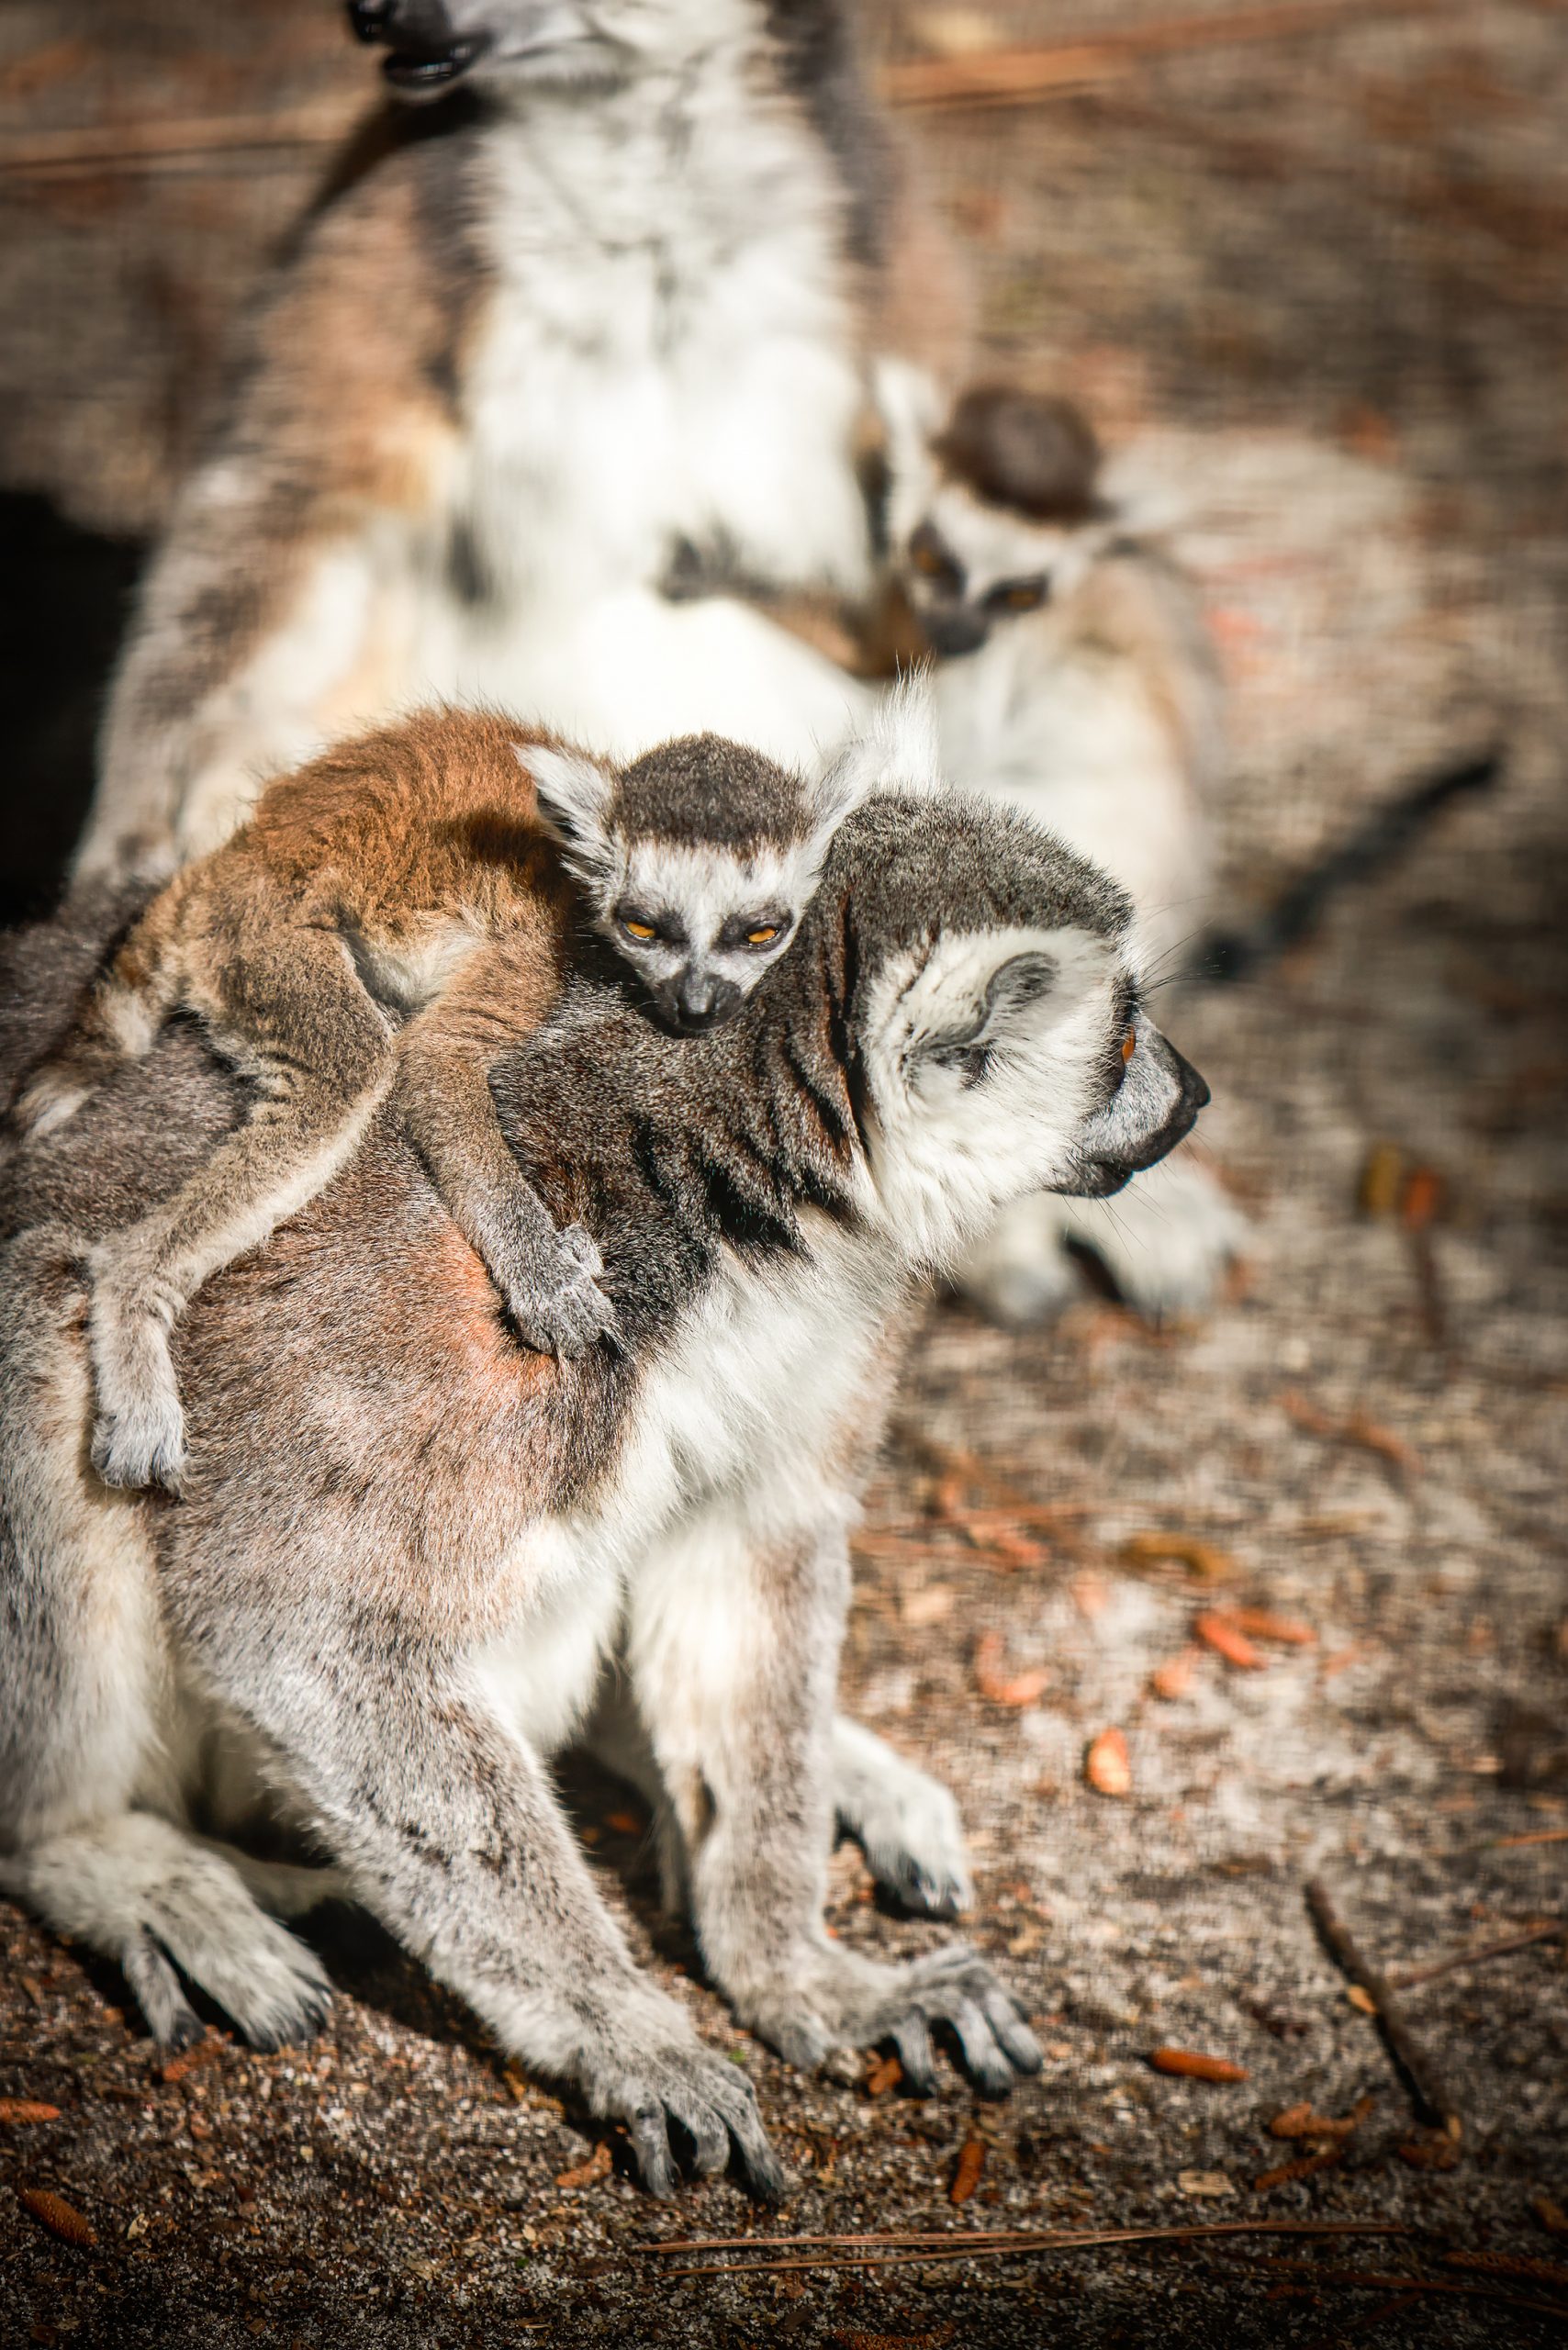 Mougli, a ringtailed lemur, holding on to his mom.
